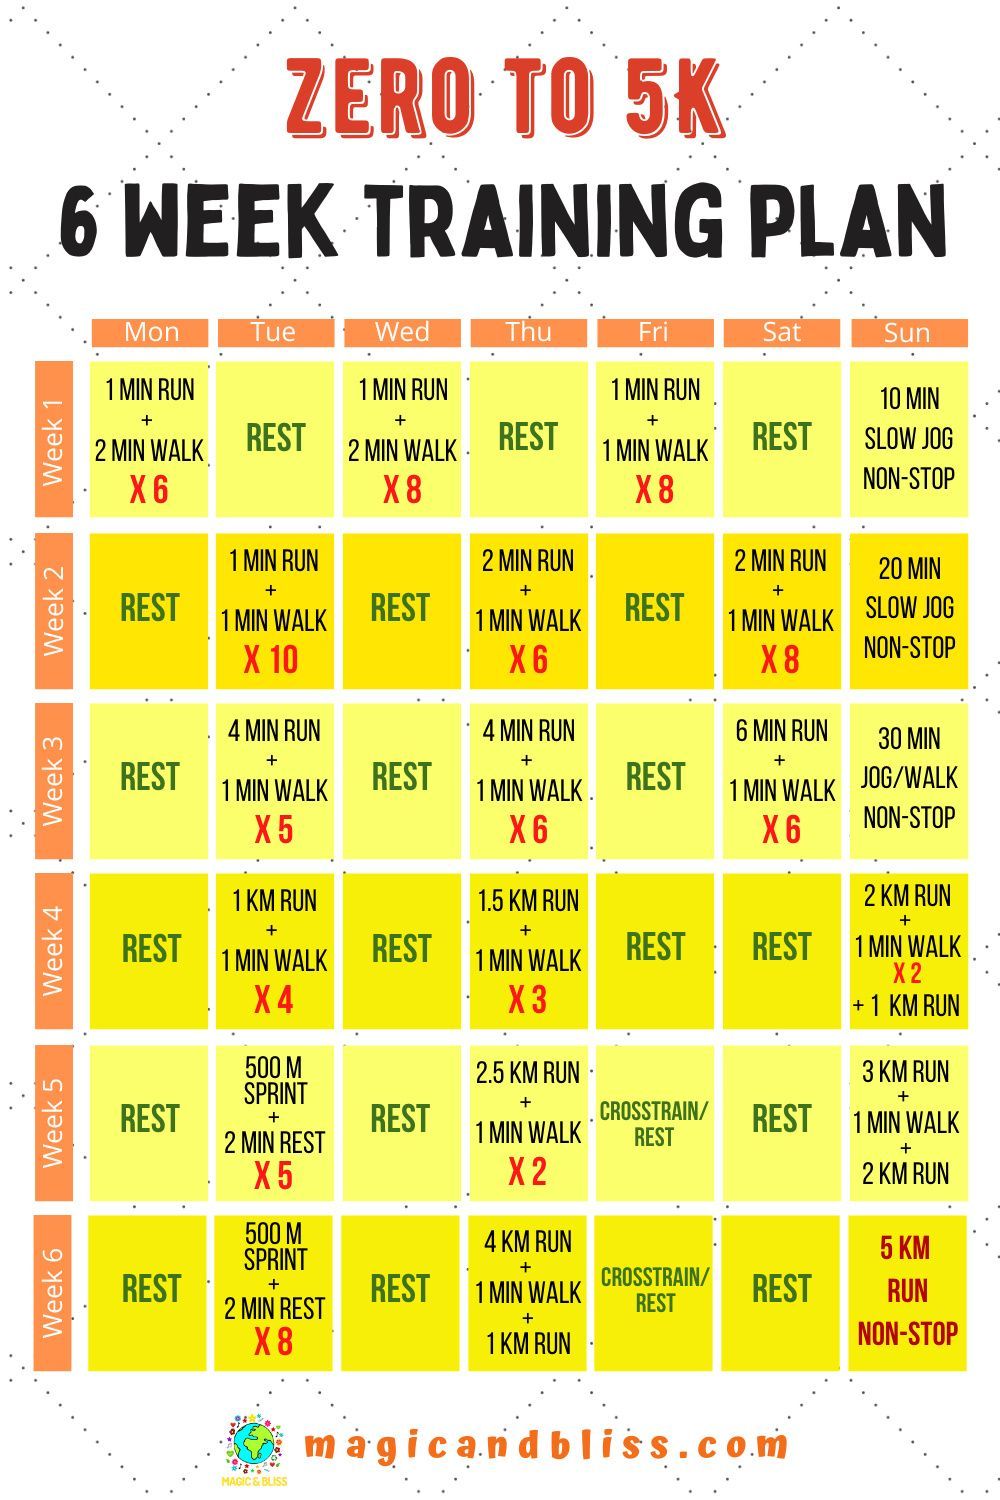 How to go from Zero to your first 5km run in 6 weeks? Your 6 Week Training Plan